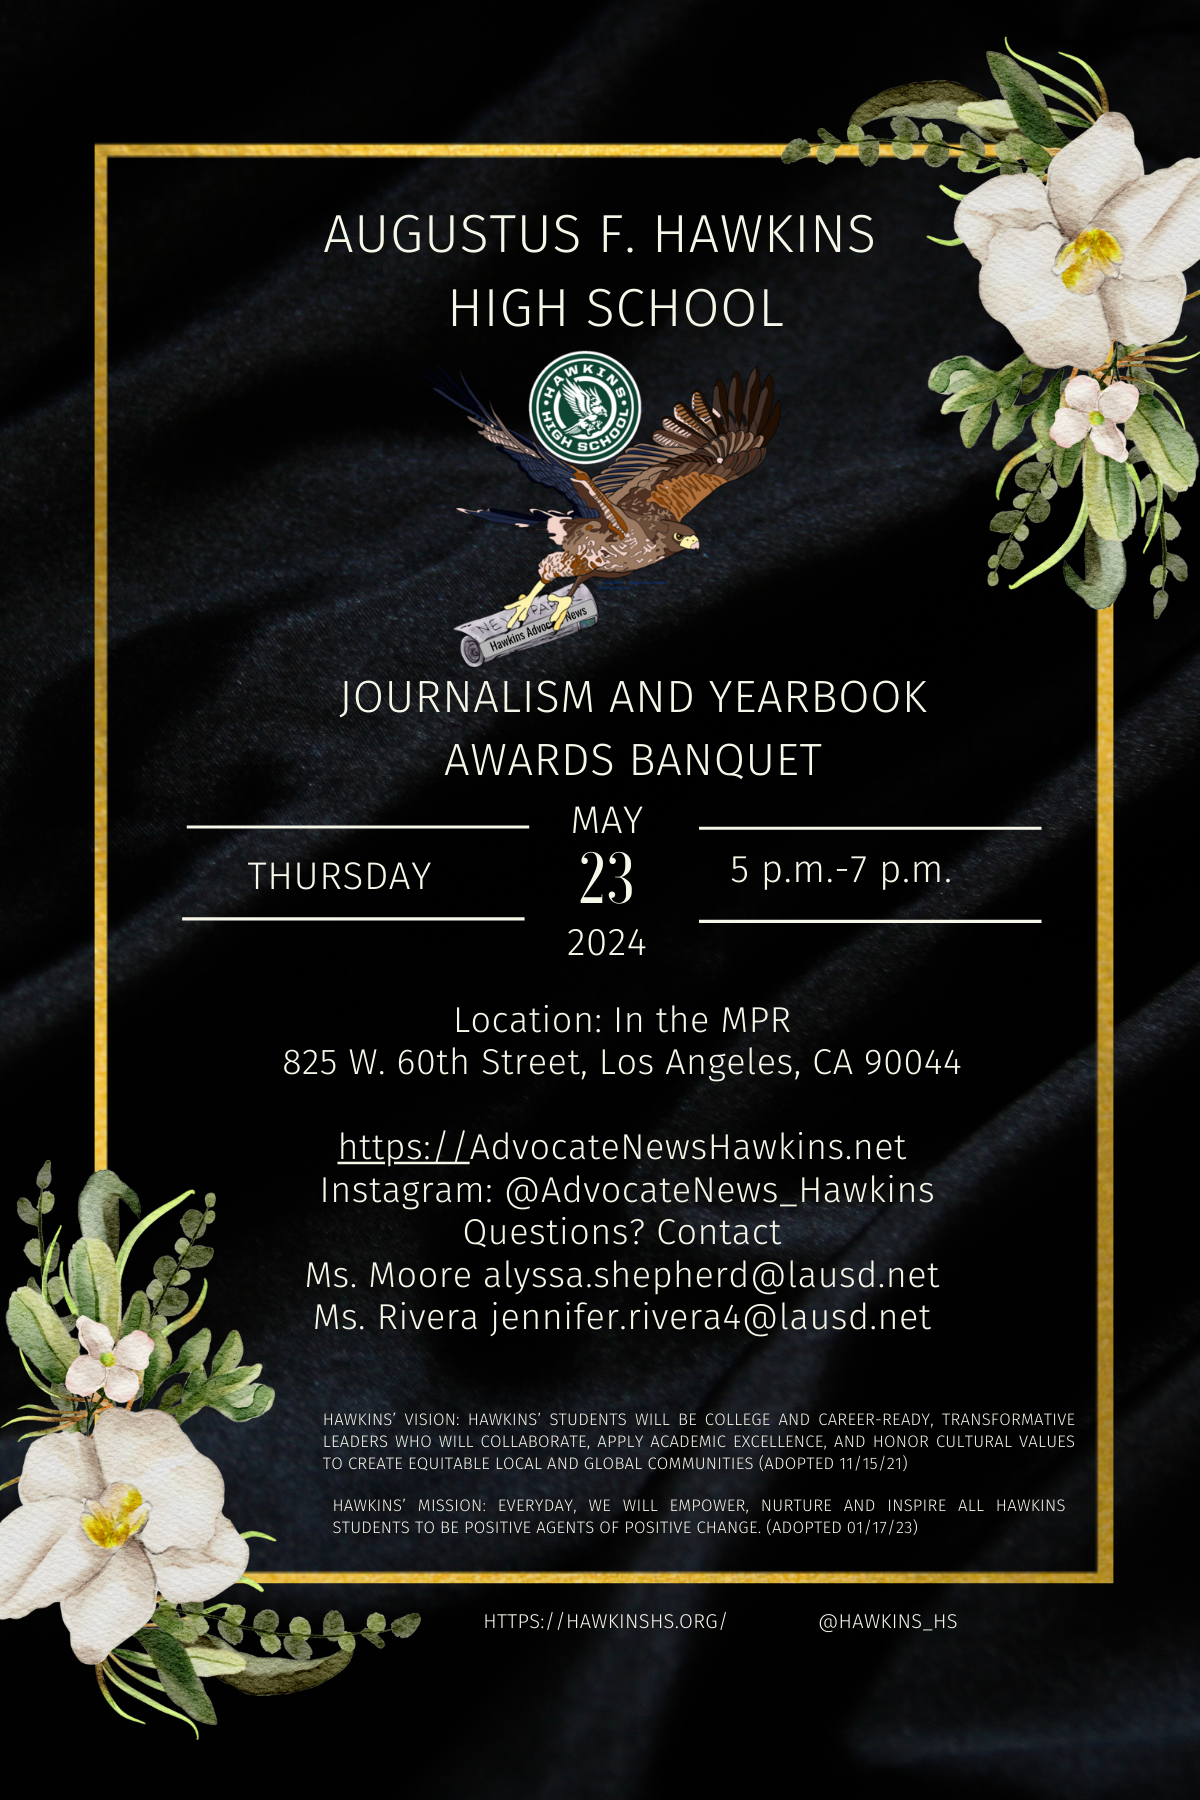 3rd Annual Journalism and Yearbook Awards Banquet